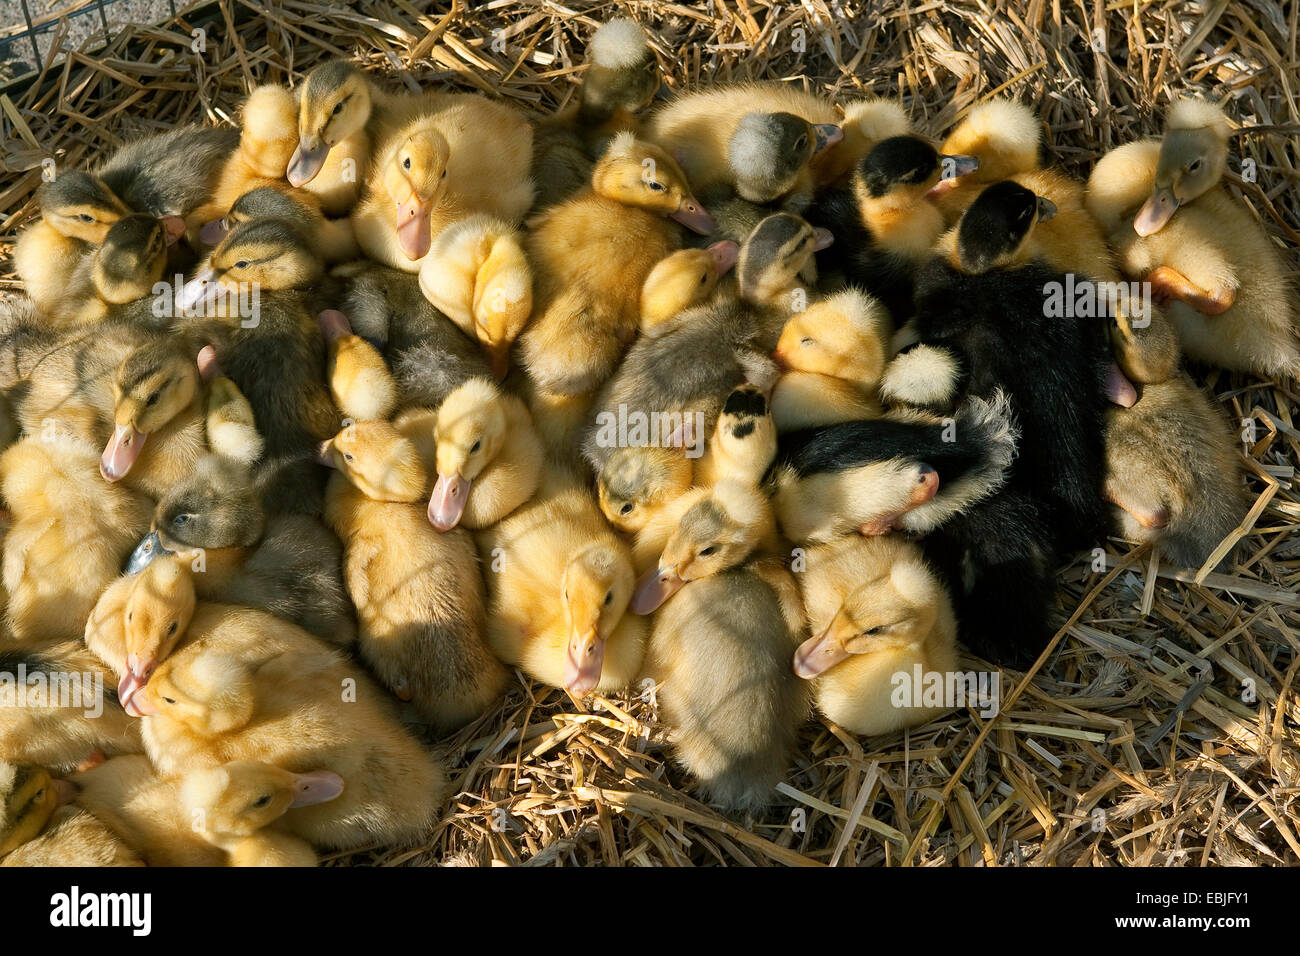 domestic duck (Anas platyrhynchos f. domestica), duck chicks are offered to buy on a poultry market Stock Photo